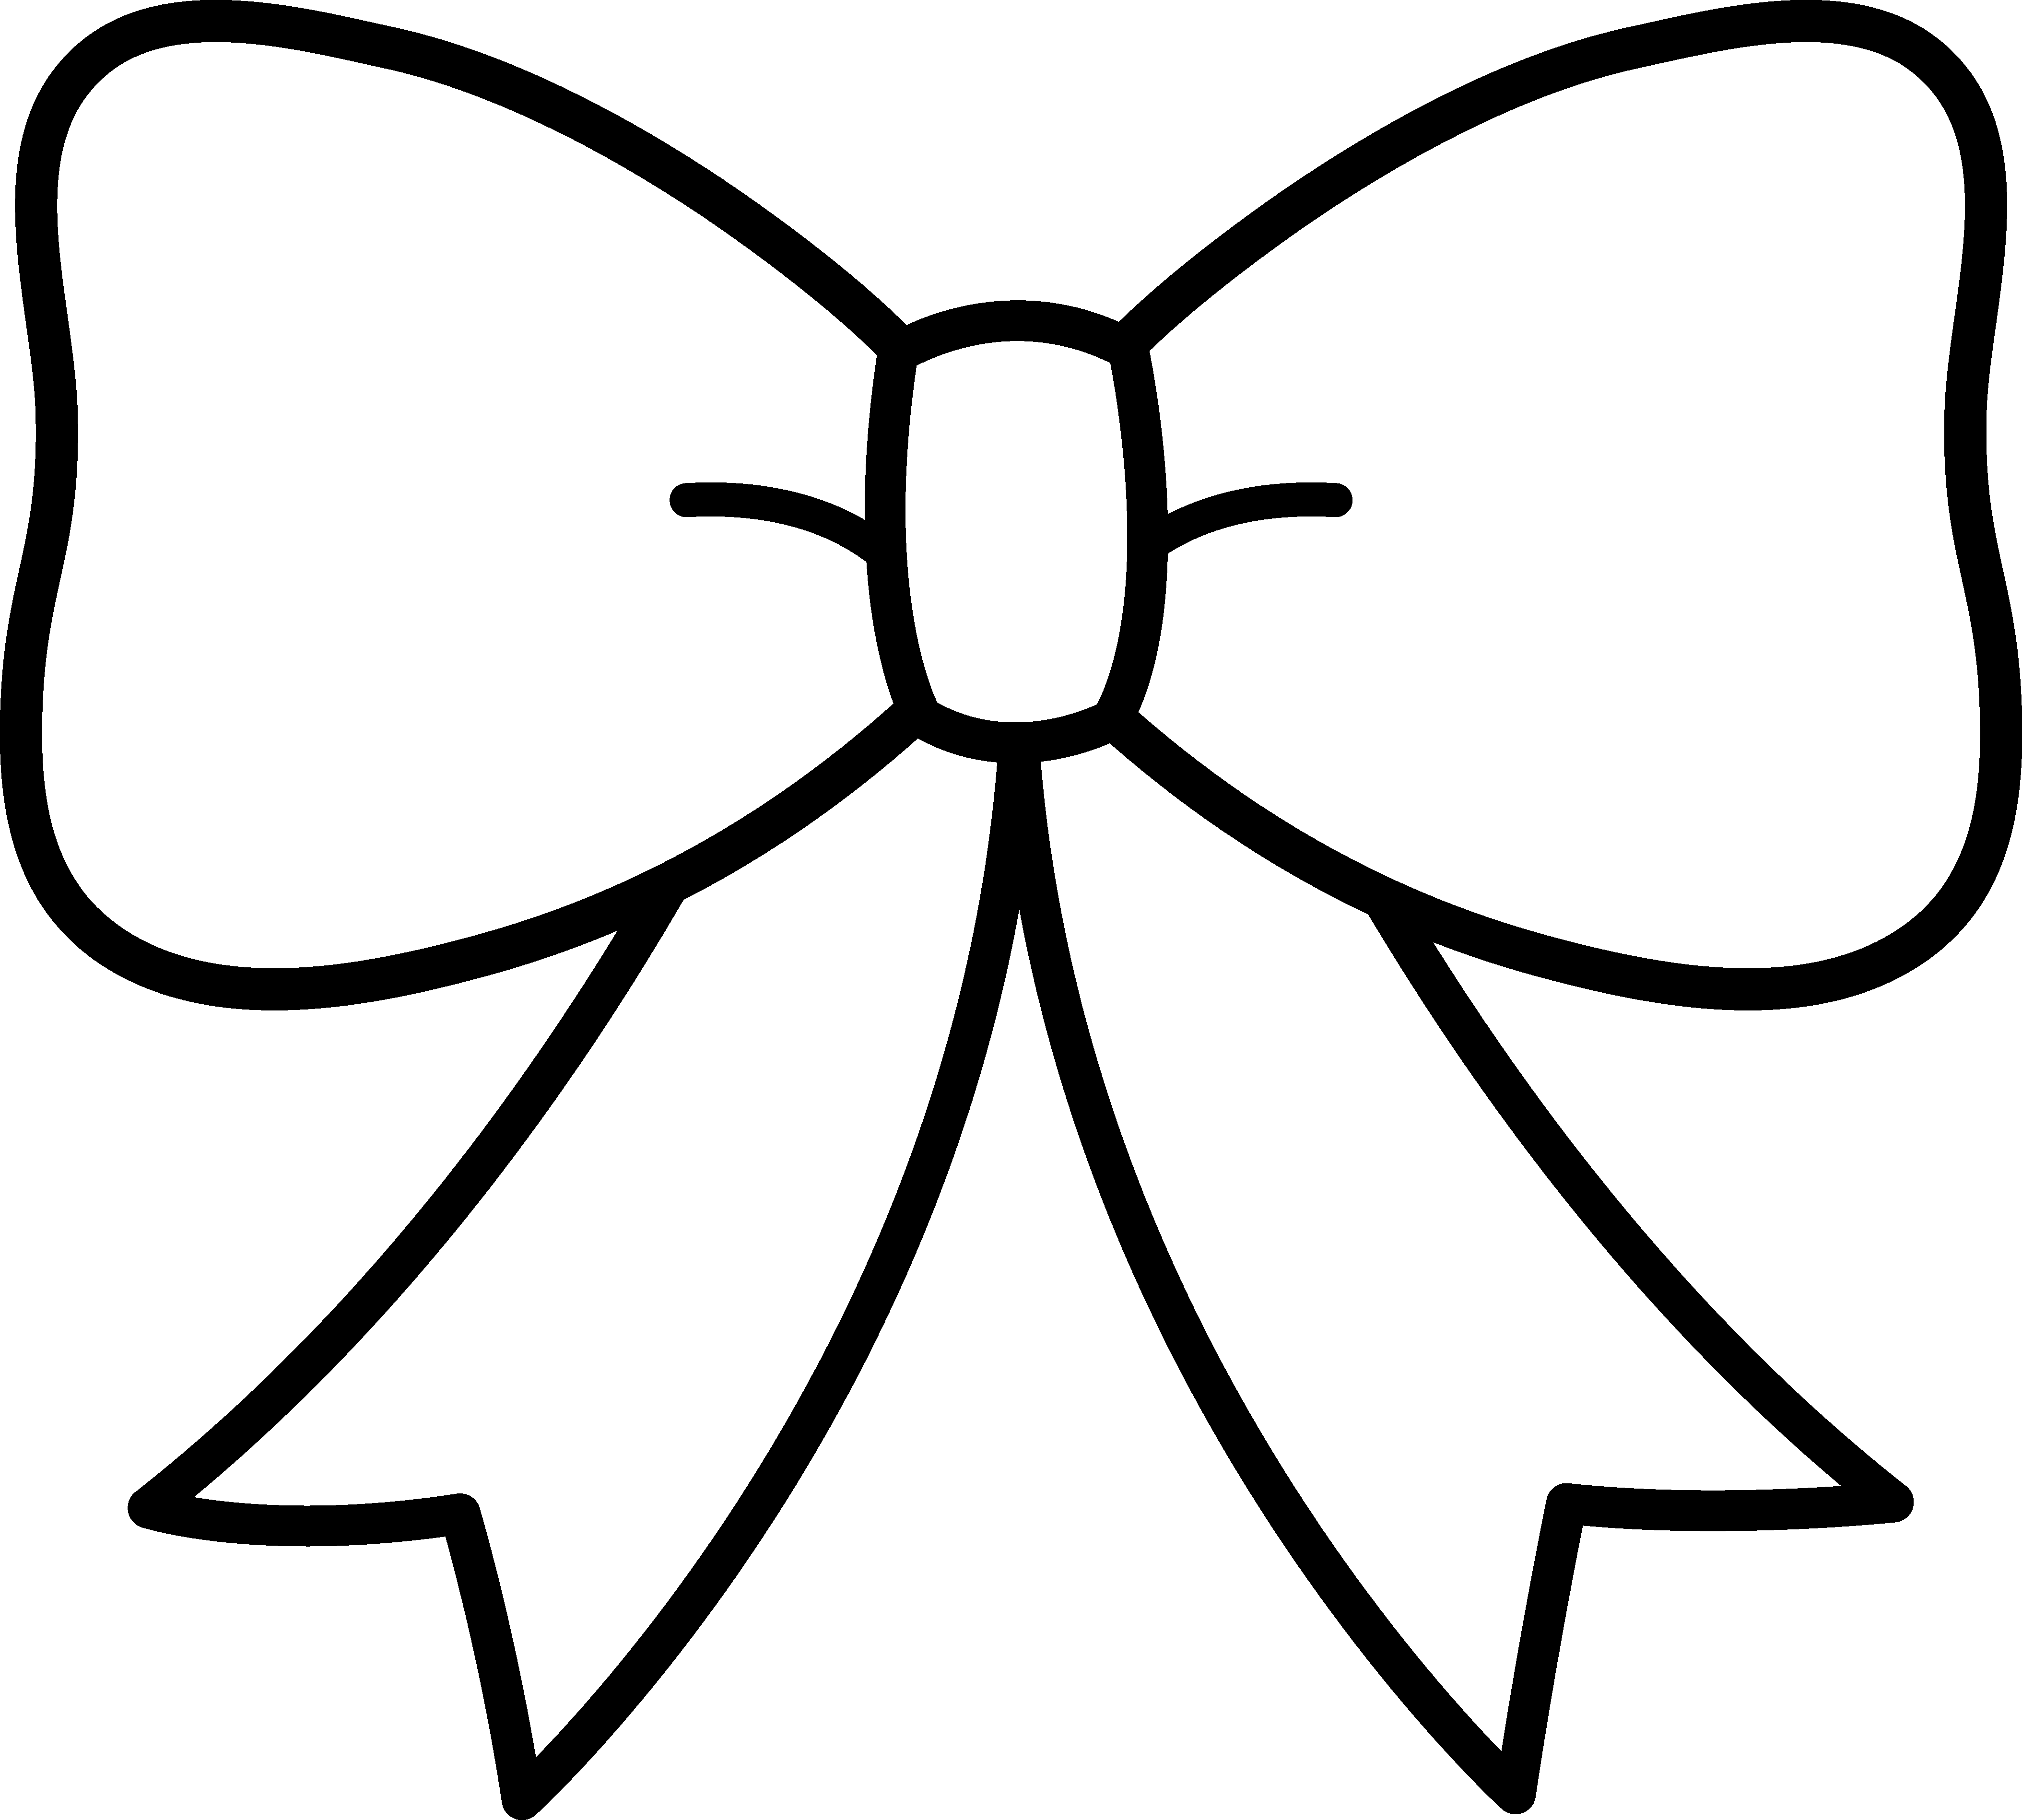 Free Cheer Bow Cliparts, Download Free Clip Art, Free Clip.